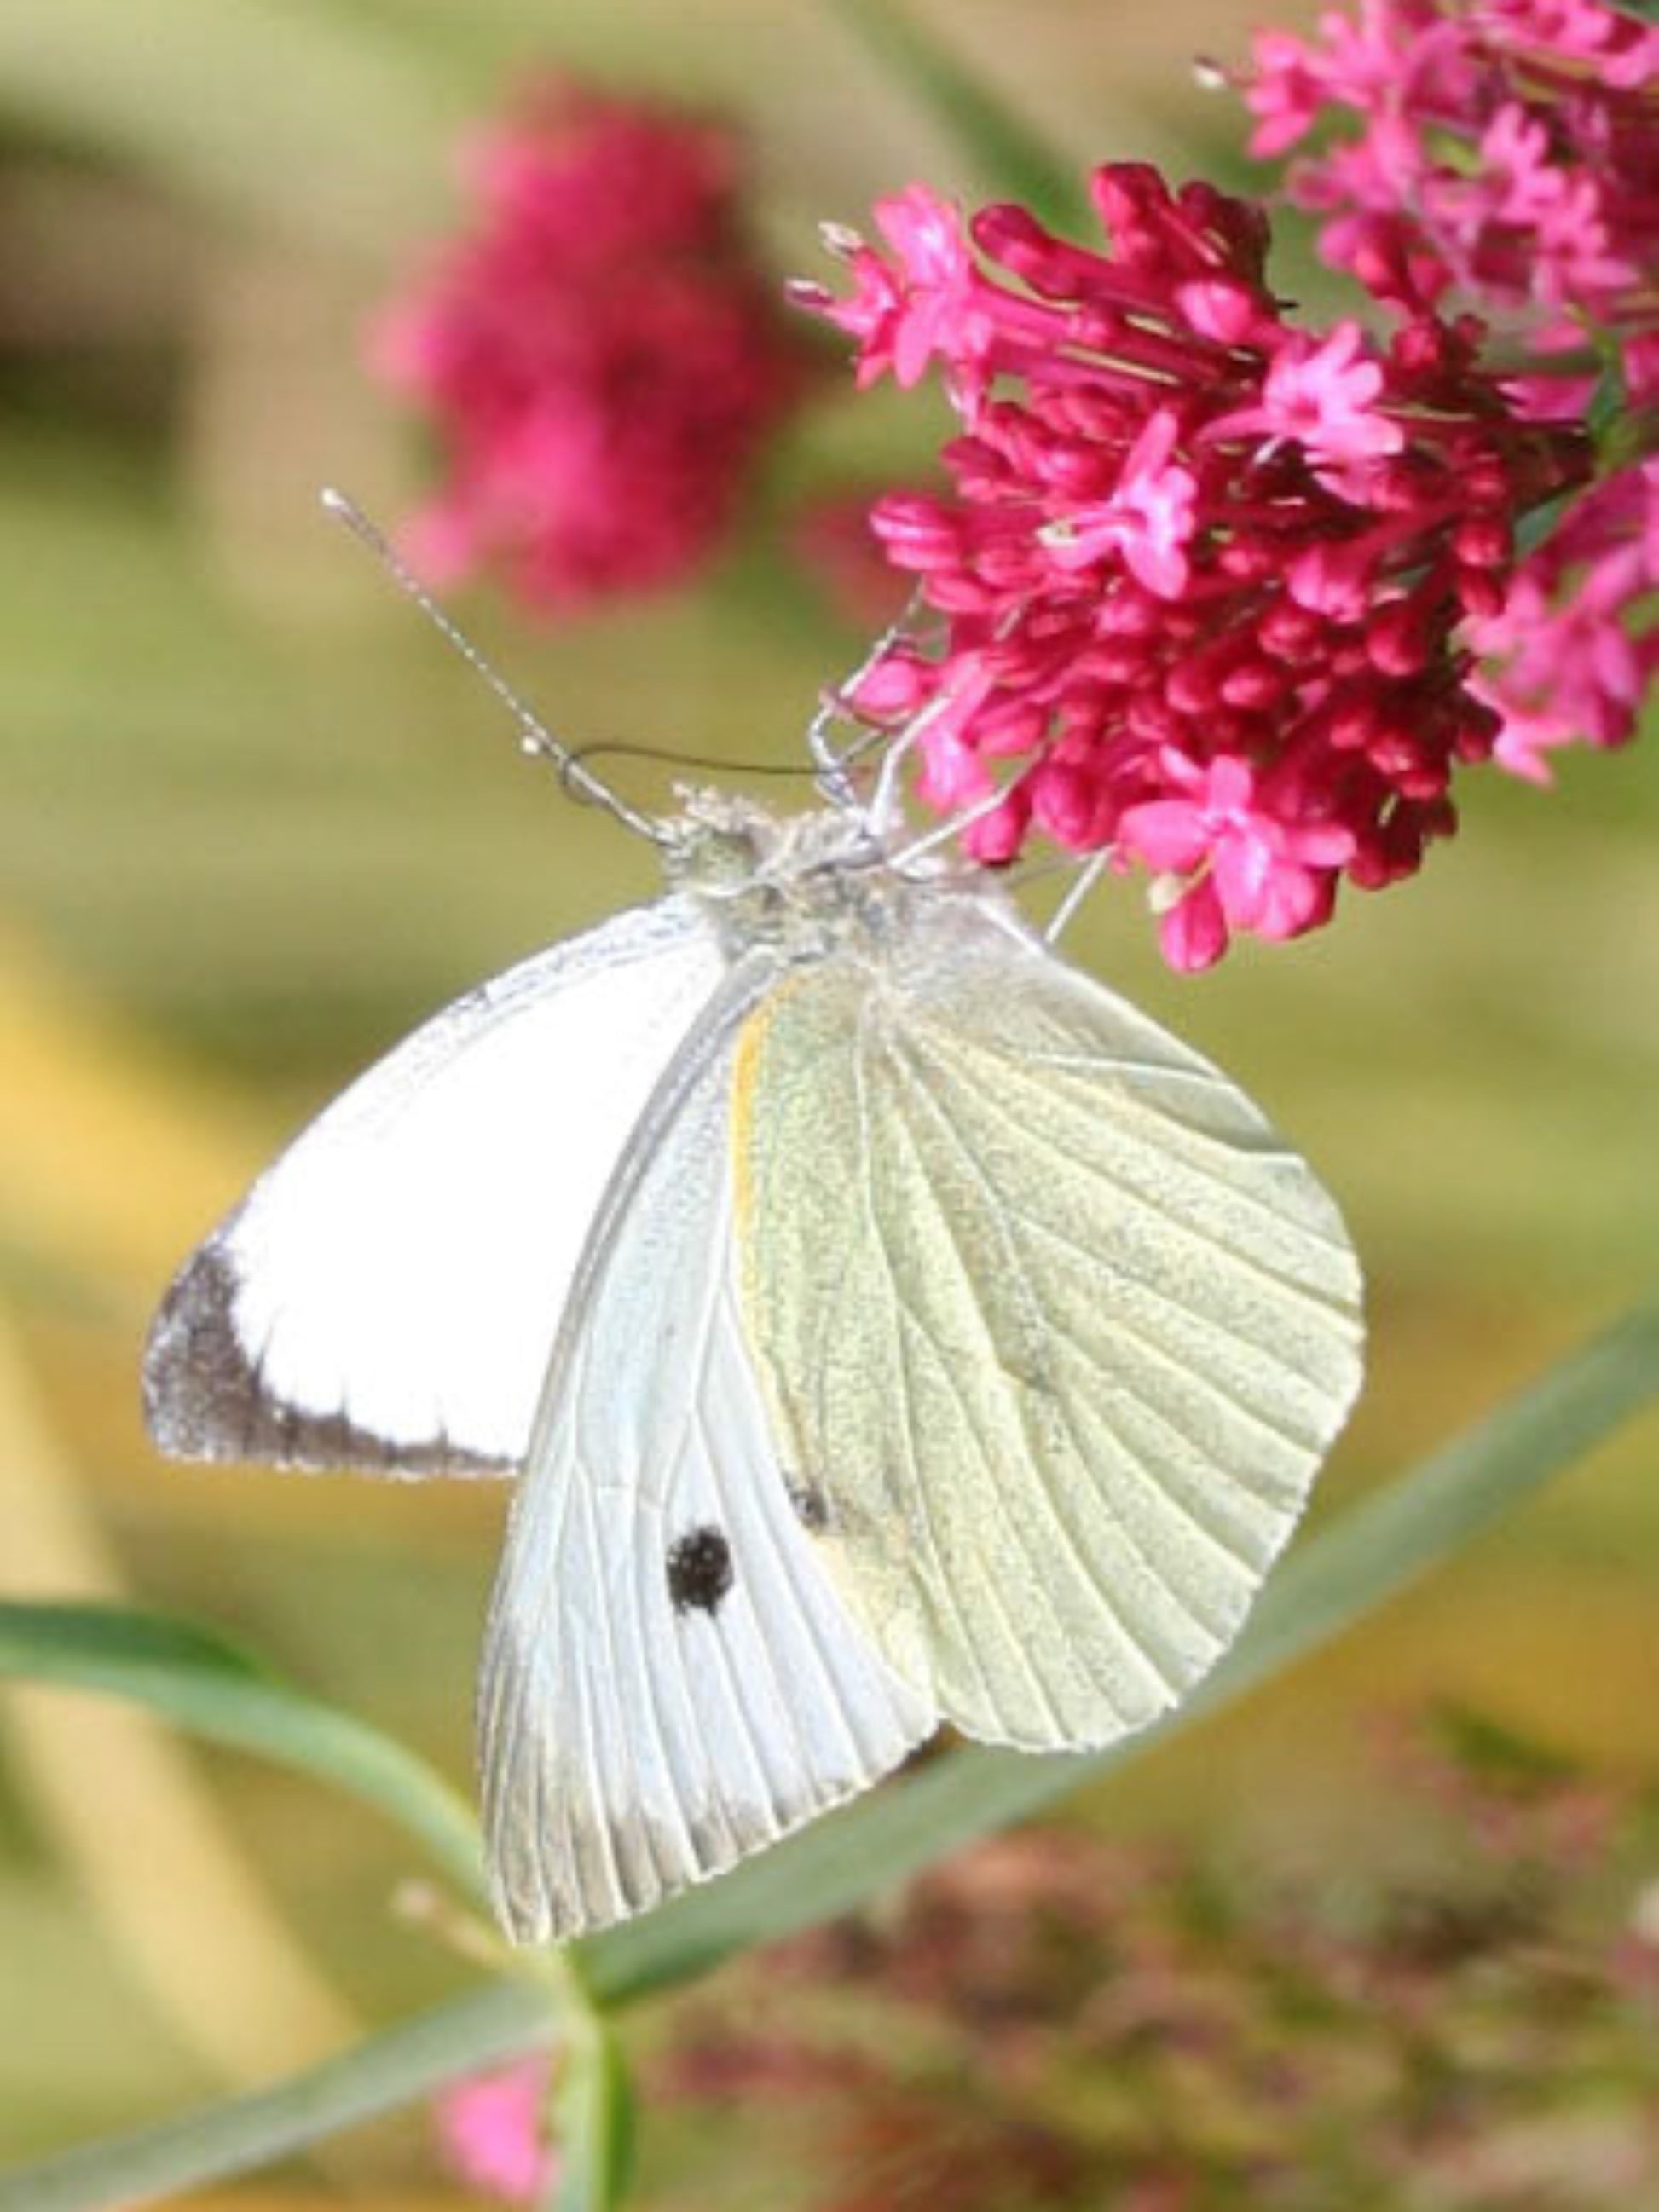 cynophalla fluxuosa " bayleaf caper tree" is the host plant for the white cabbage butterfly